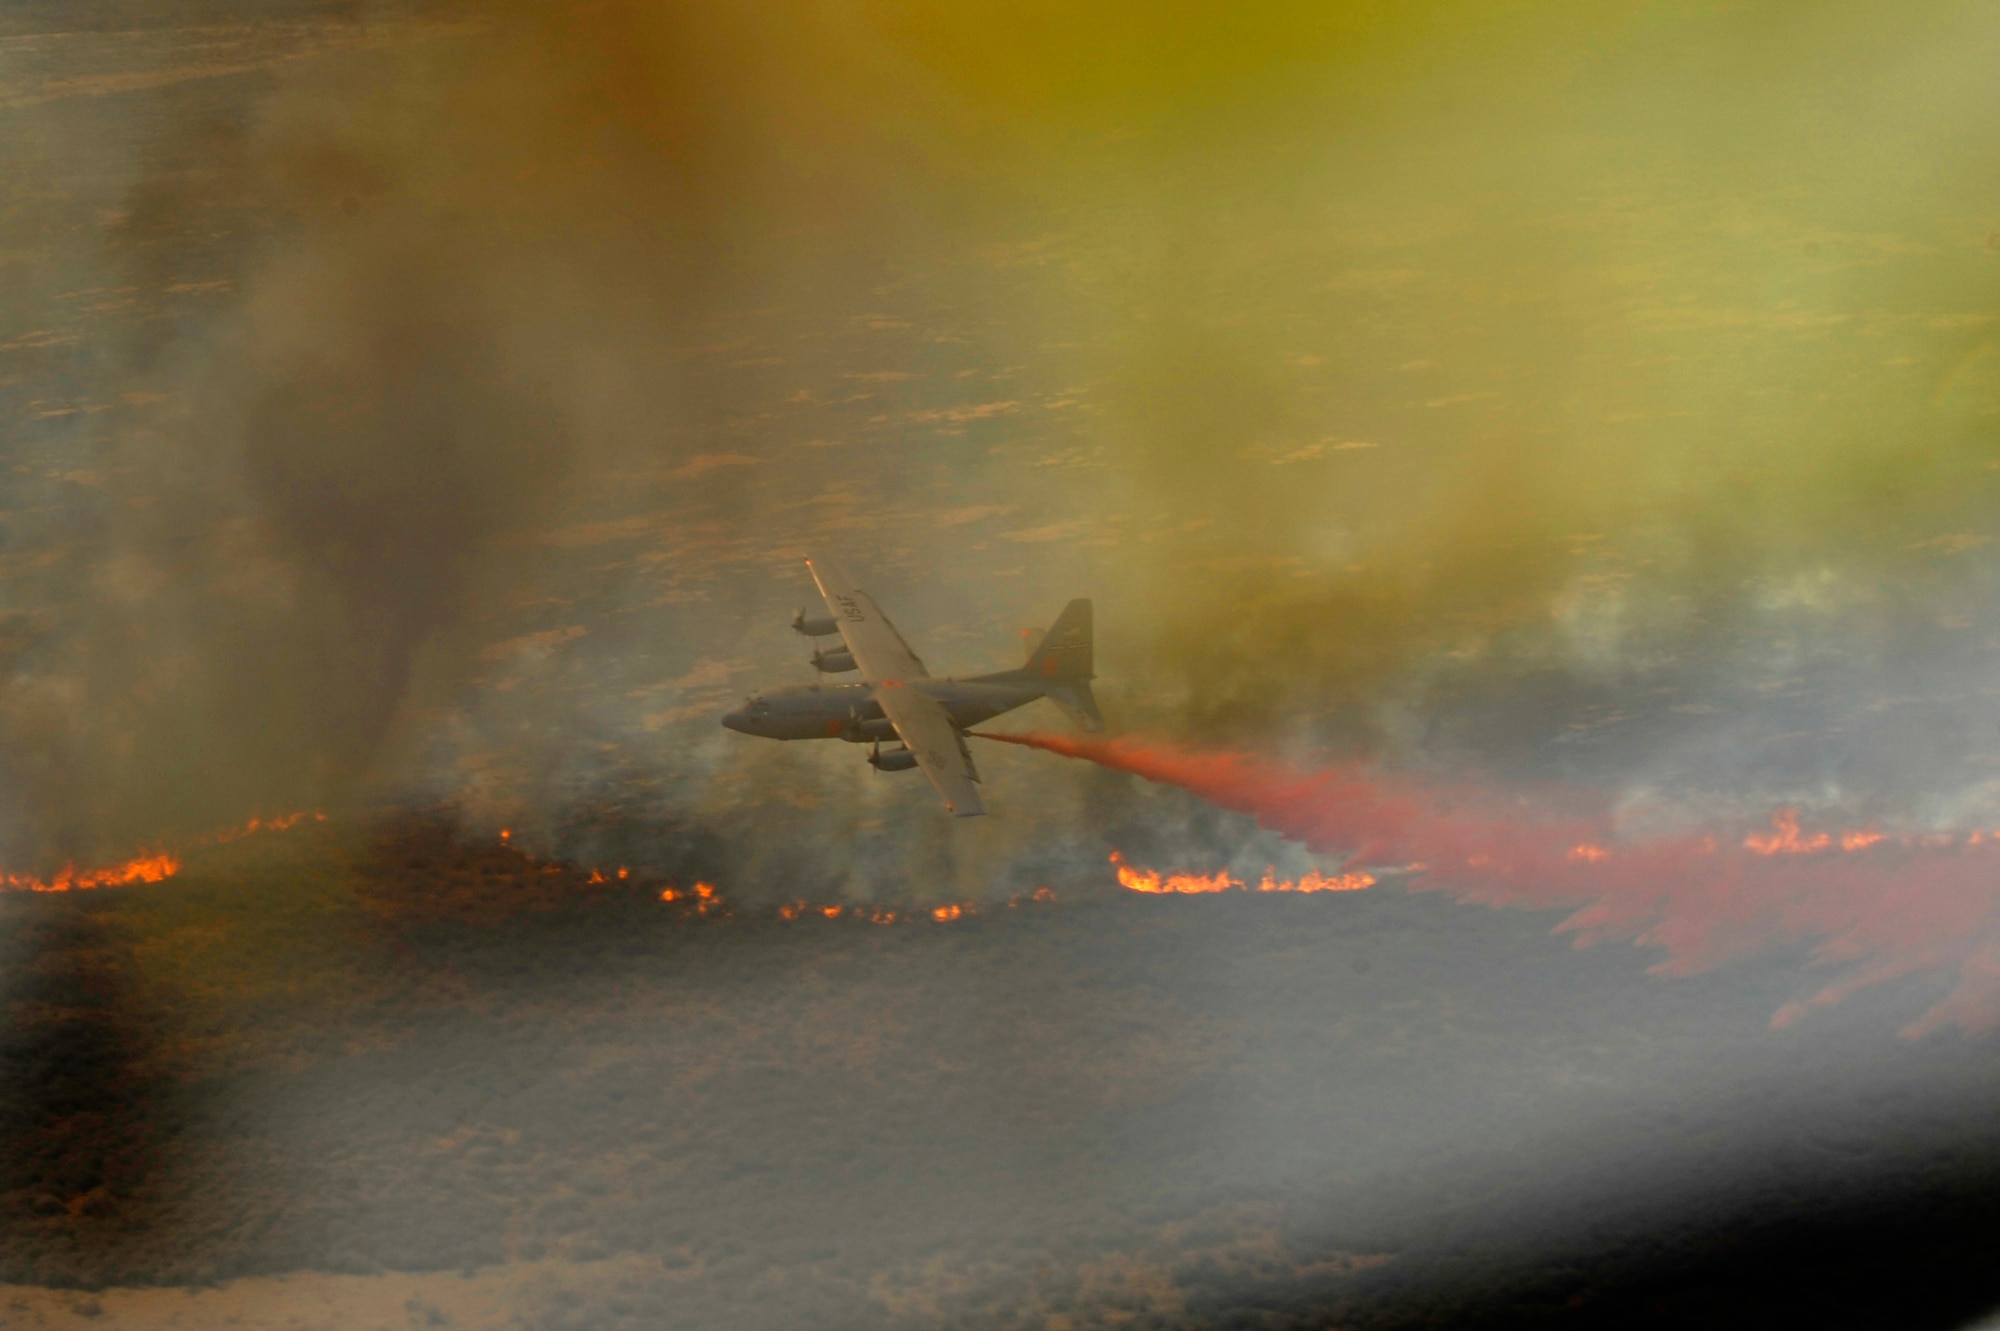 A C-130H Hercules from the 302nd Airlift Wing, Colorado Springs Air Force Reserve, equipped with the Modular Airborne Firefighting System (MAFFS) drops a line of fire retardant in West Texas, April 27, 2011.  MAFFS is capable of dispensing 3,000 gallons of water or fire retardant in under 5 seconds.  The wildfires have spread across various parts of Texas and have burned more than 1,000 square miles of land.  (U.S. Air Force Photo/Staff Sgt. Eric Harris)
